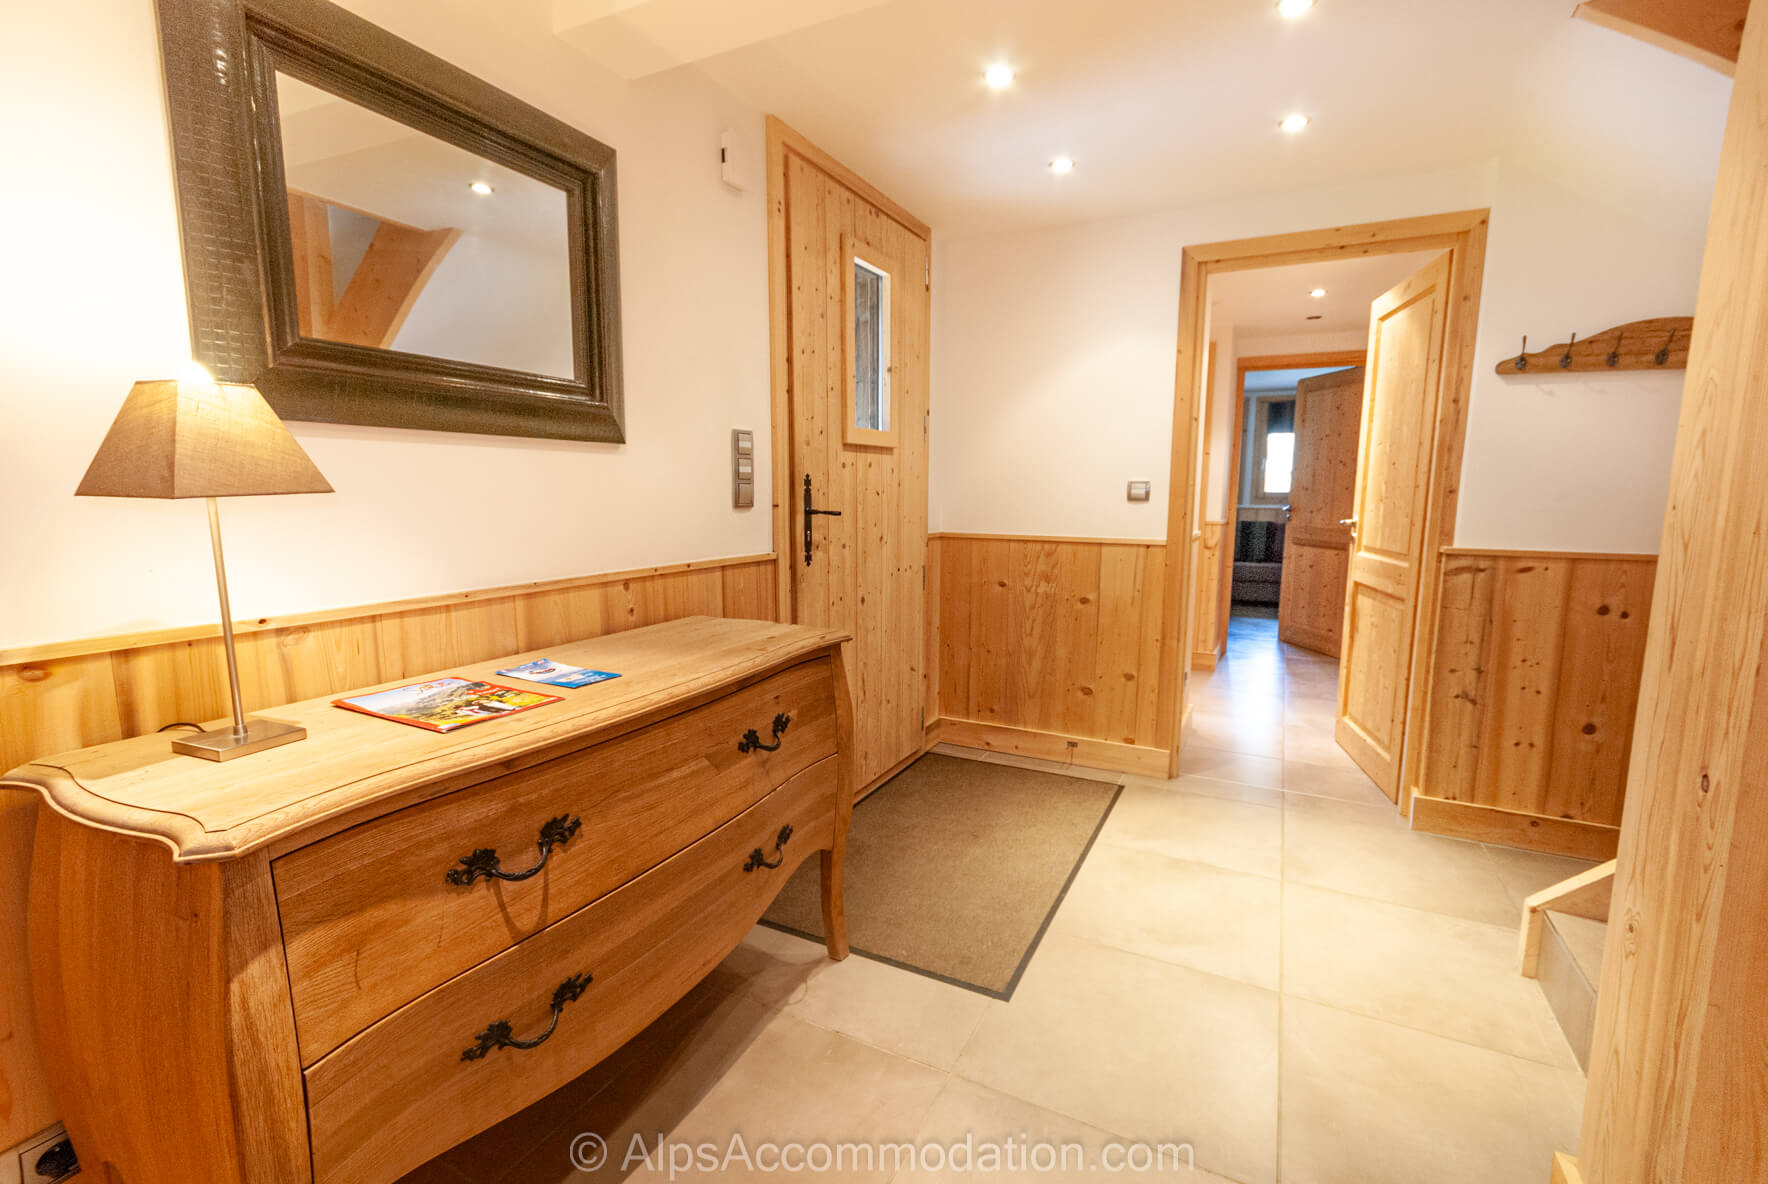 Chalet Foehn Samoëns - Large entrance hall welcomes you into the chalet